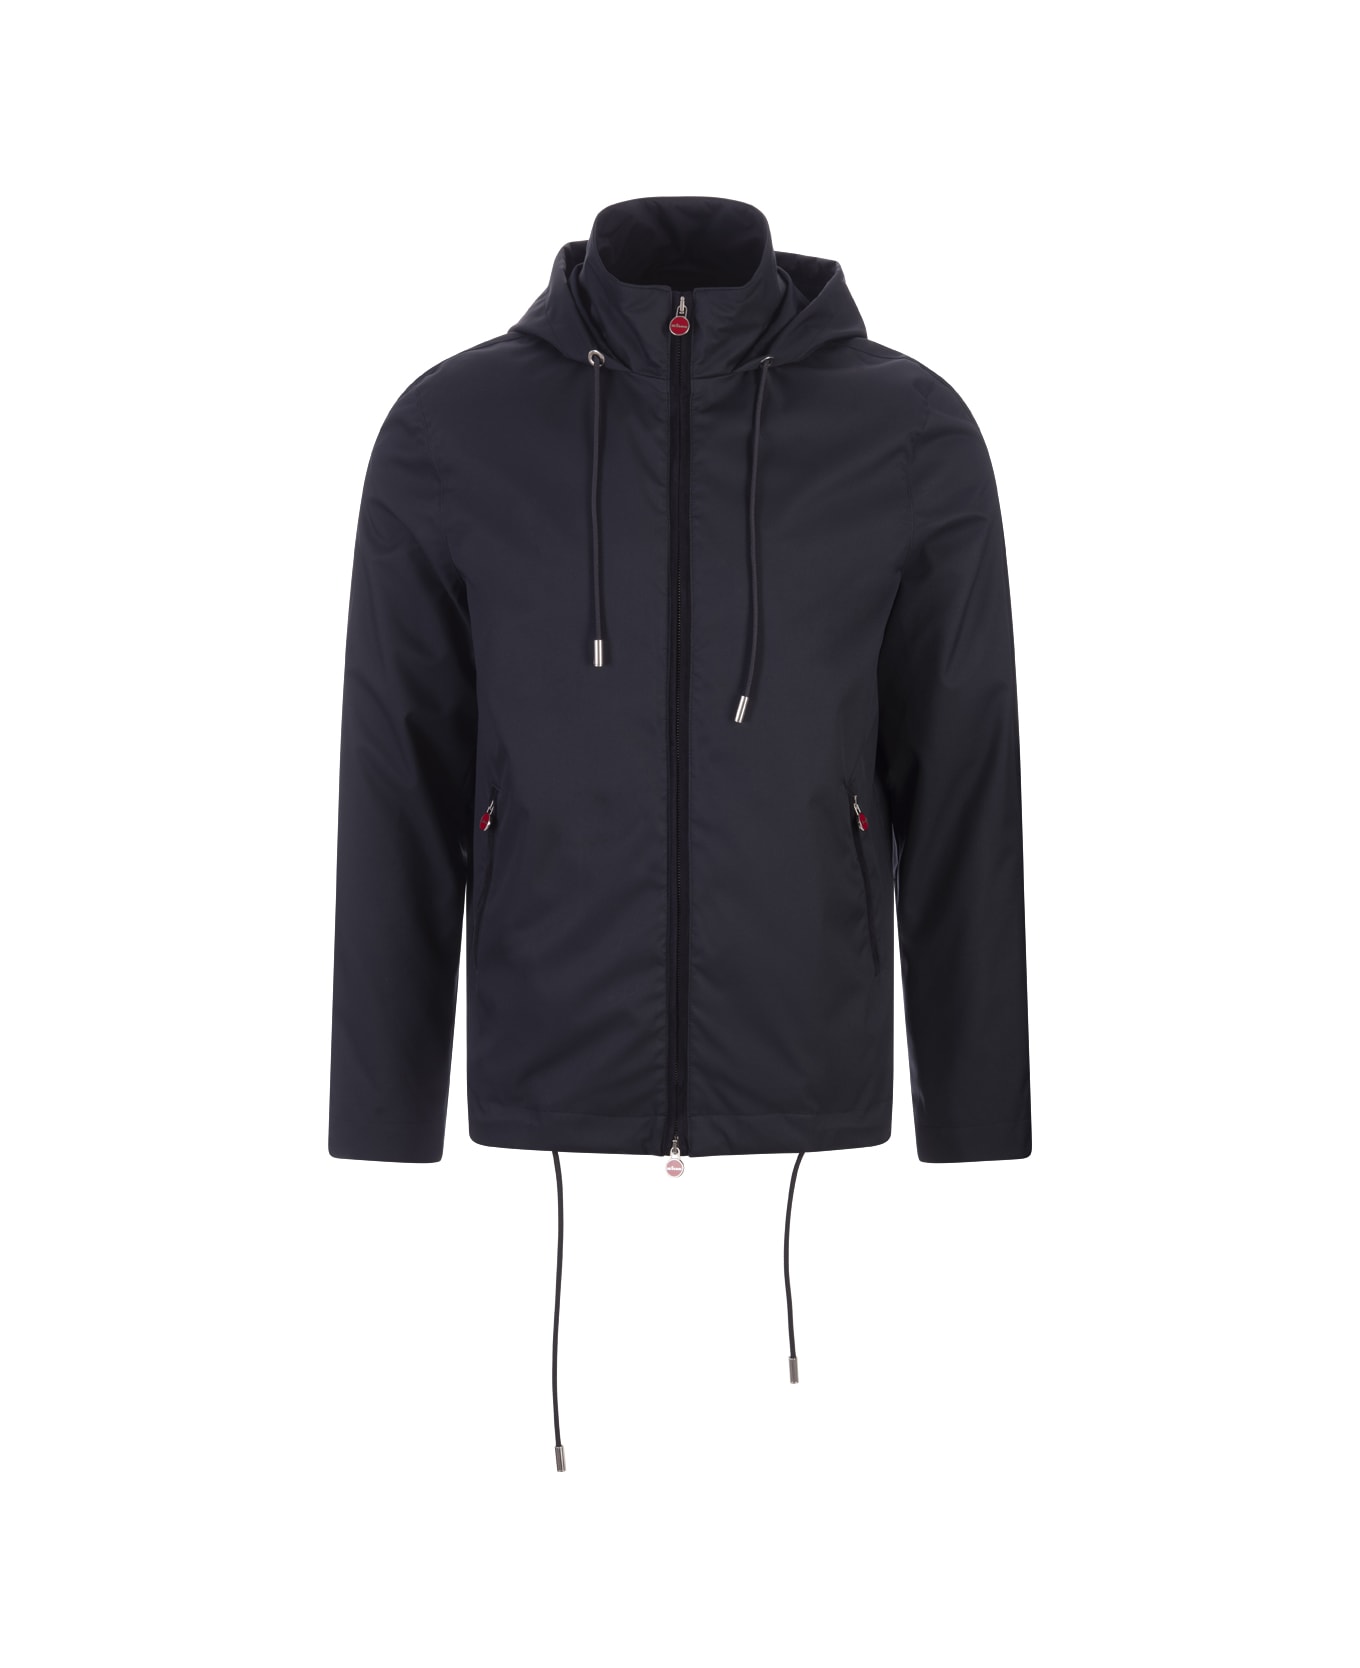 Kiton Lightweight Jacket In Blue Technical Fabric - Blue